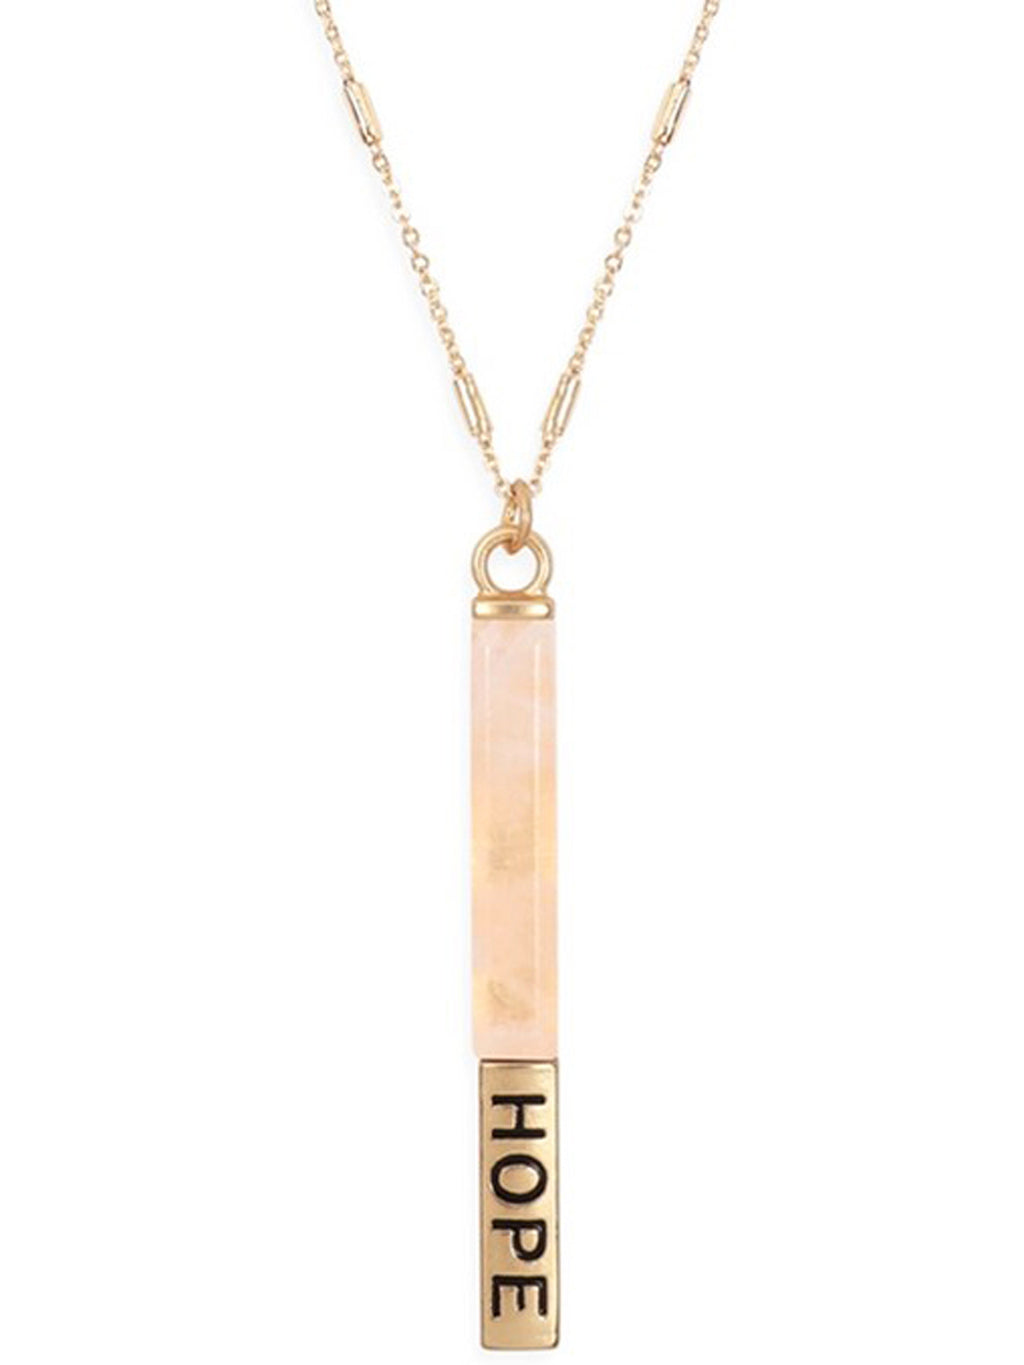 Natural Stone Hope Bar Pendant Necklace With Gold Chain